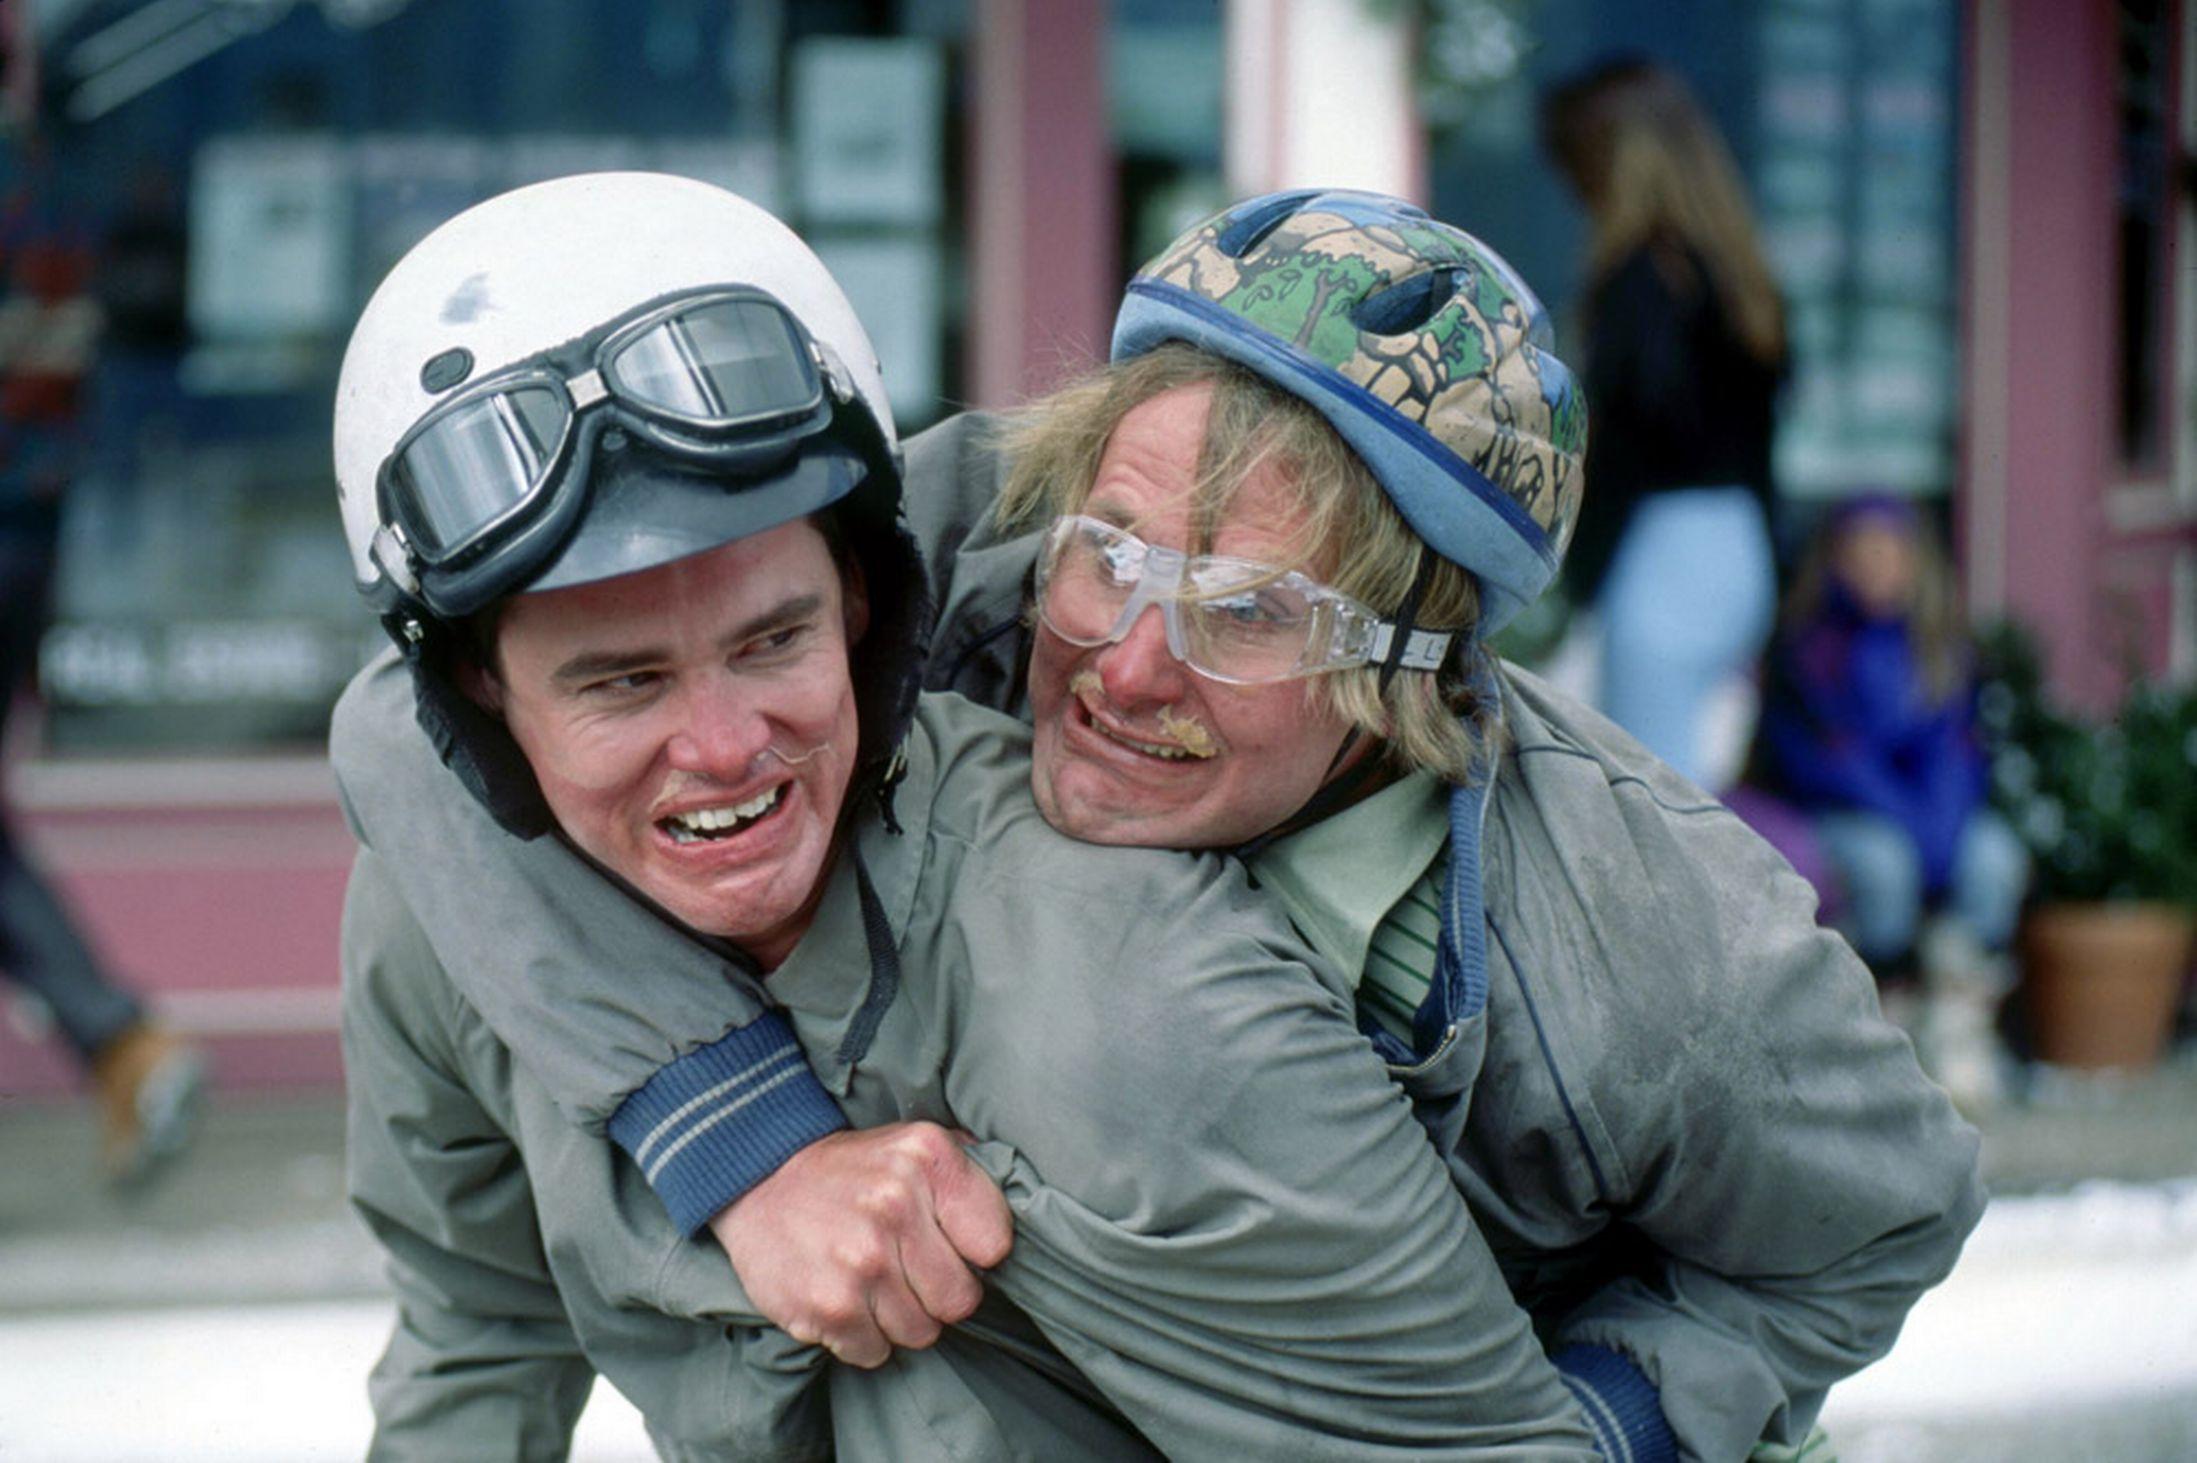 12 Dumb and Dumber To HD Wallpapers.